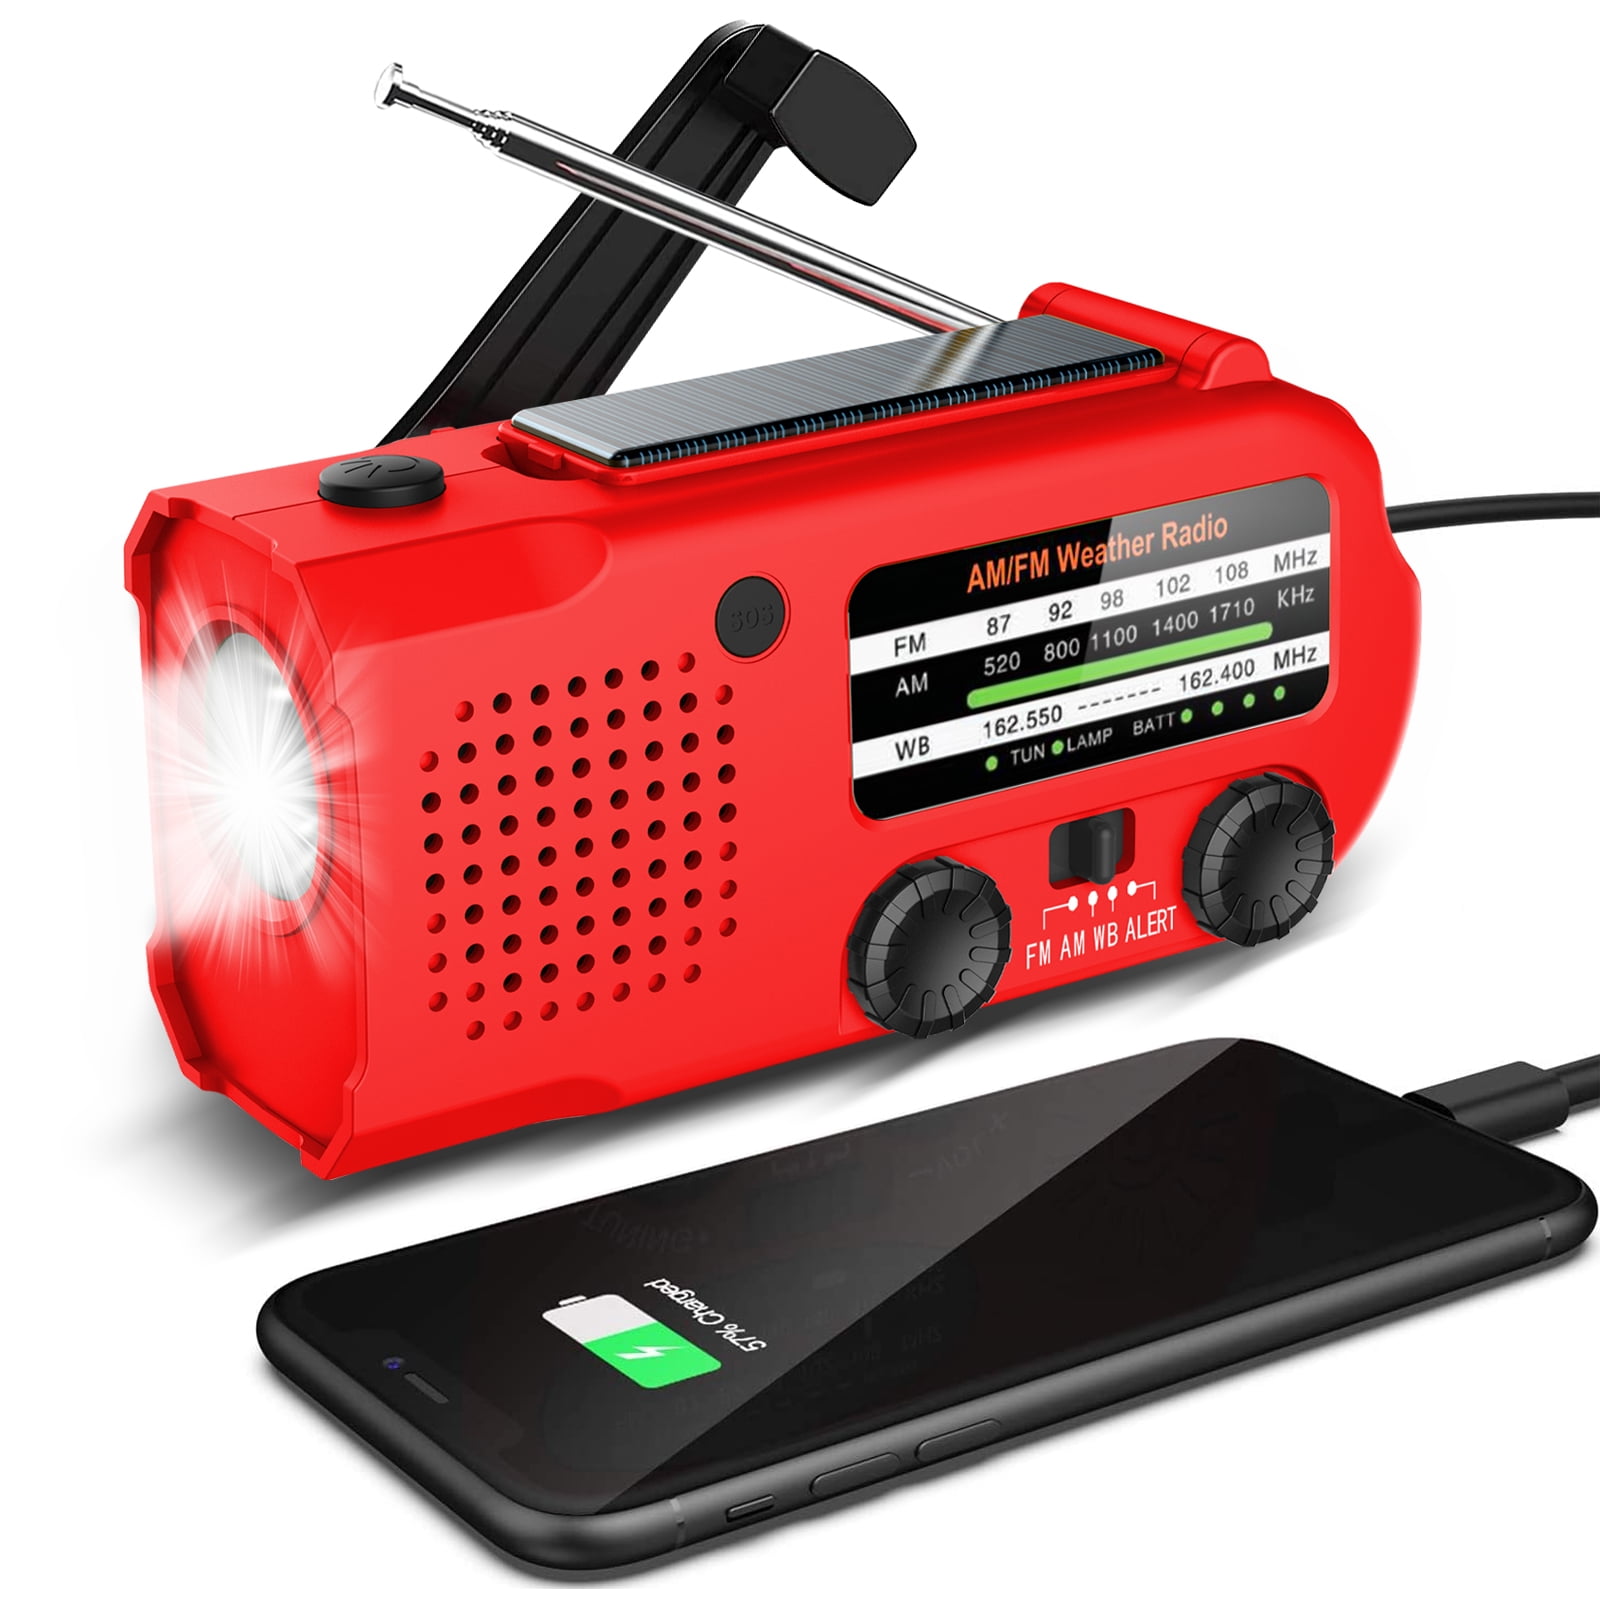 Solar Hand Crank Emergency Radio, EEEkit Portable NOAA Weather Radio with AM /FM/WB, LED Flashlight, Power Bank USB Charger, SOS Alarm,  Water-resistant Outdoor Household Emergency Device, Red